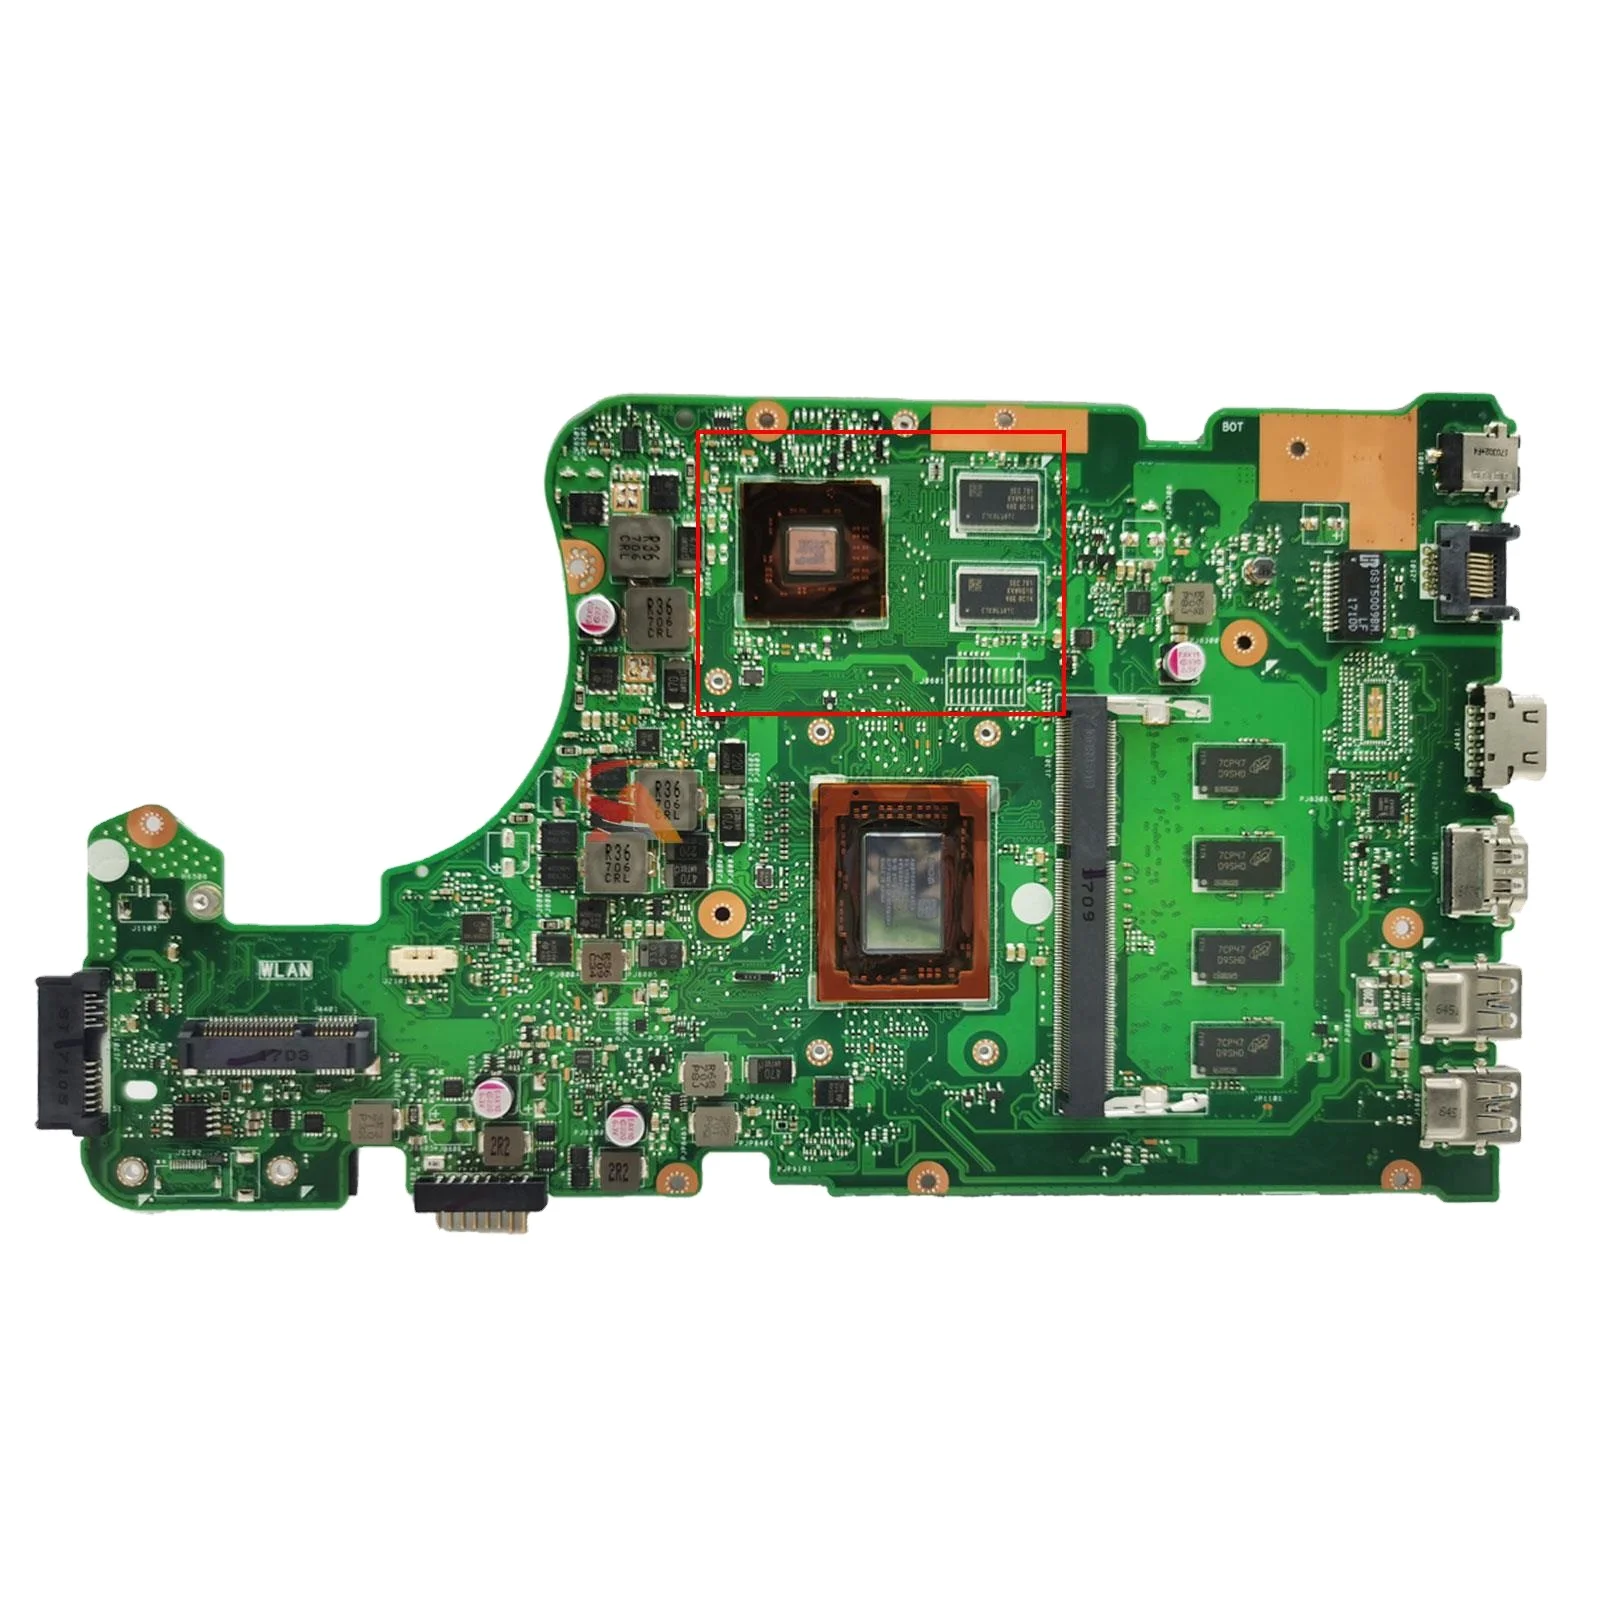 

X555DG Notebook X555YA Motherboard For ASUS X555Y X555YI X555D X555DA K555D Laptop Mainboard CPU E1 E2 A4 A6 A8 A10 A12 FX-8800P